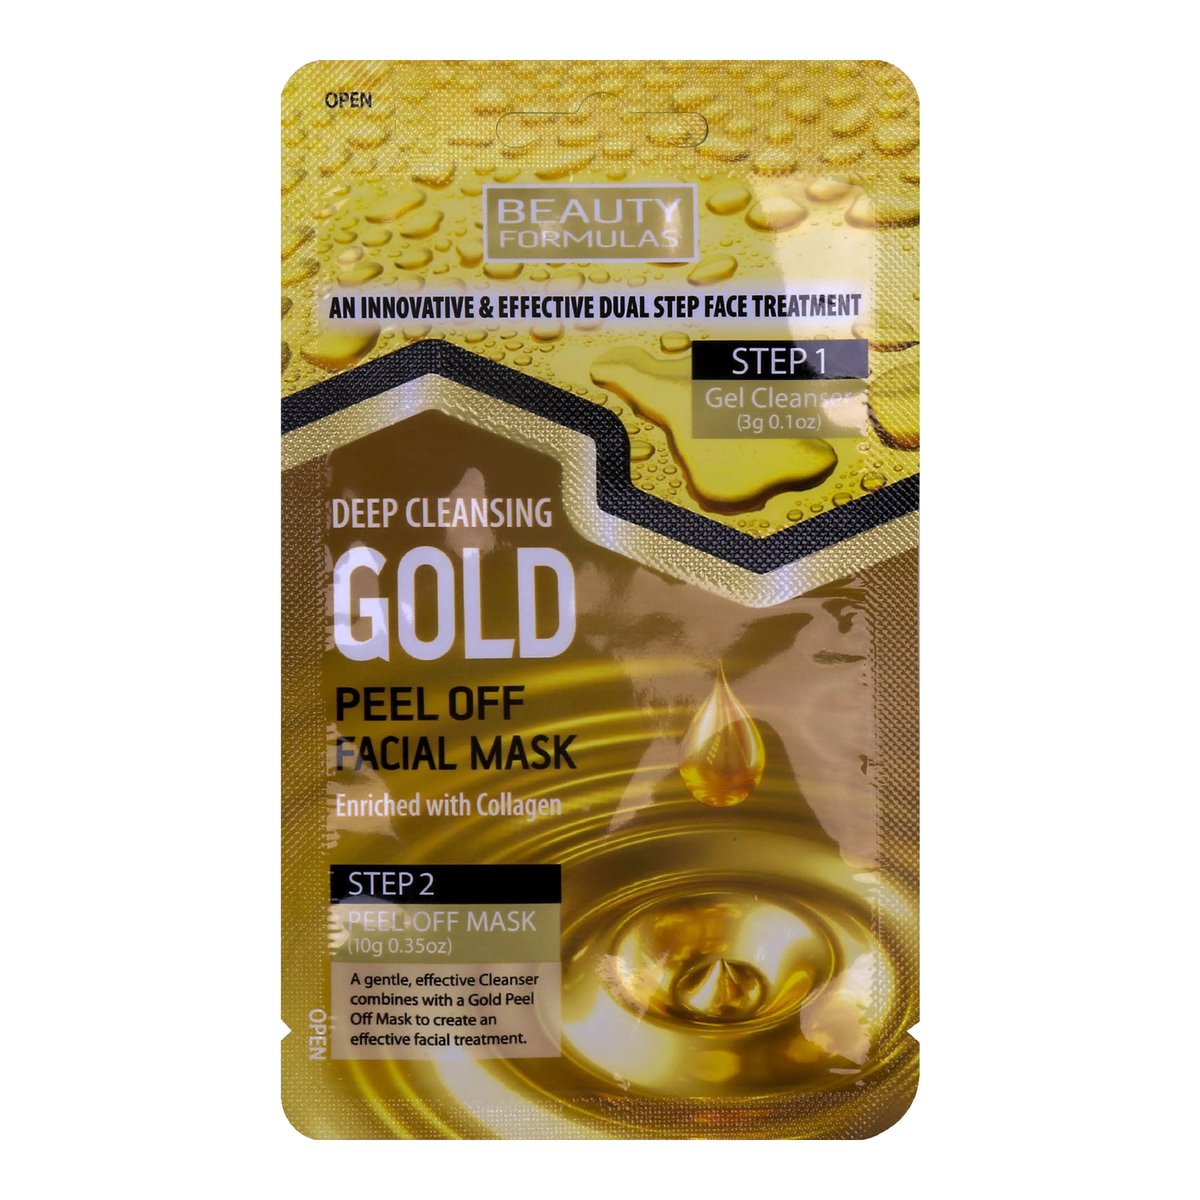 Beauty Formulas Peel Off Facial Mask Deep Cleansing Gold 1pc